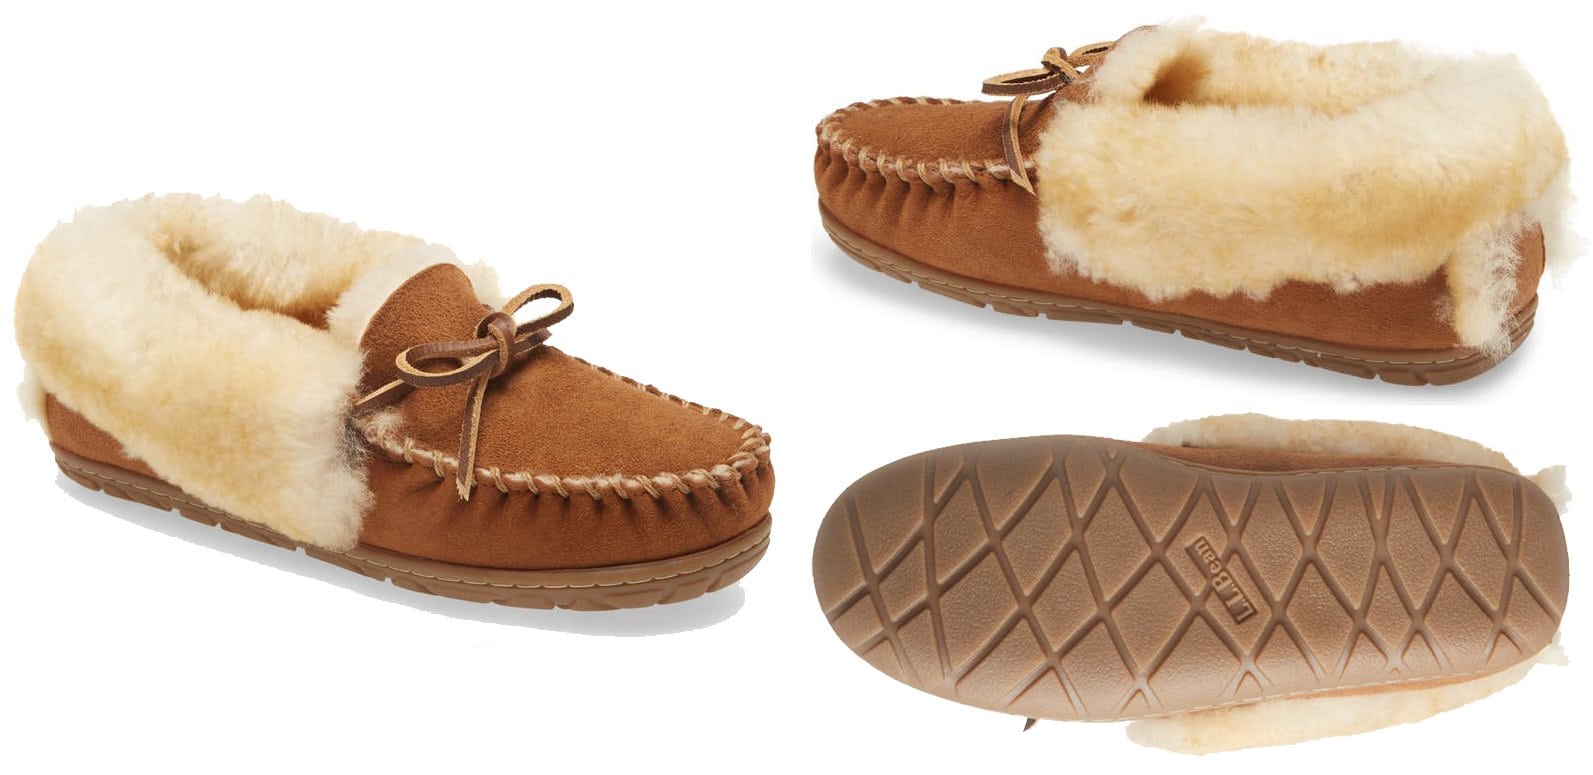 L.L. Bean's Wicked Good moccasins are a pair of supple slippers with a naturally warm genuine shearling lining and a durable sole with traction